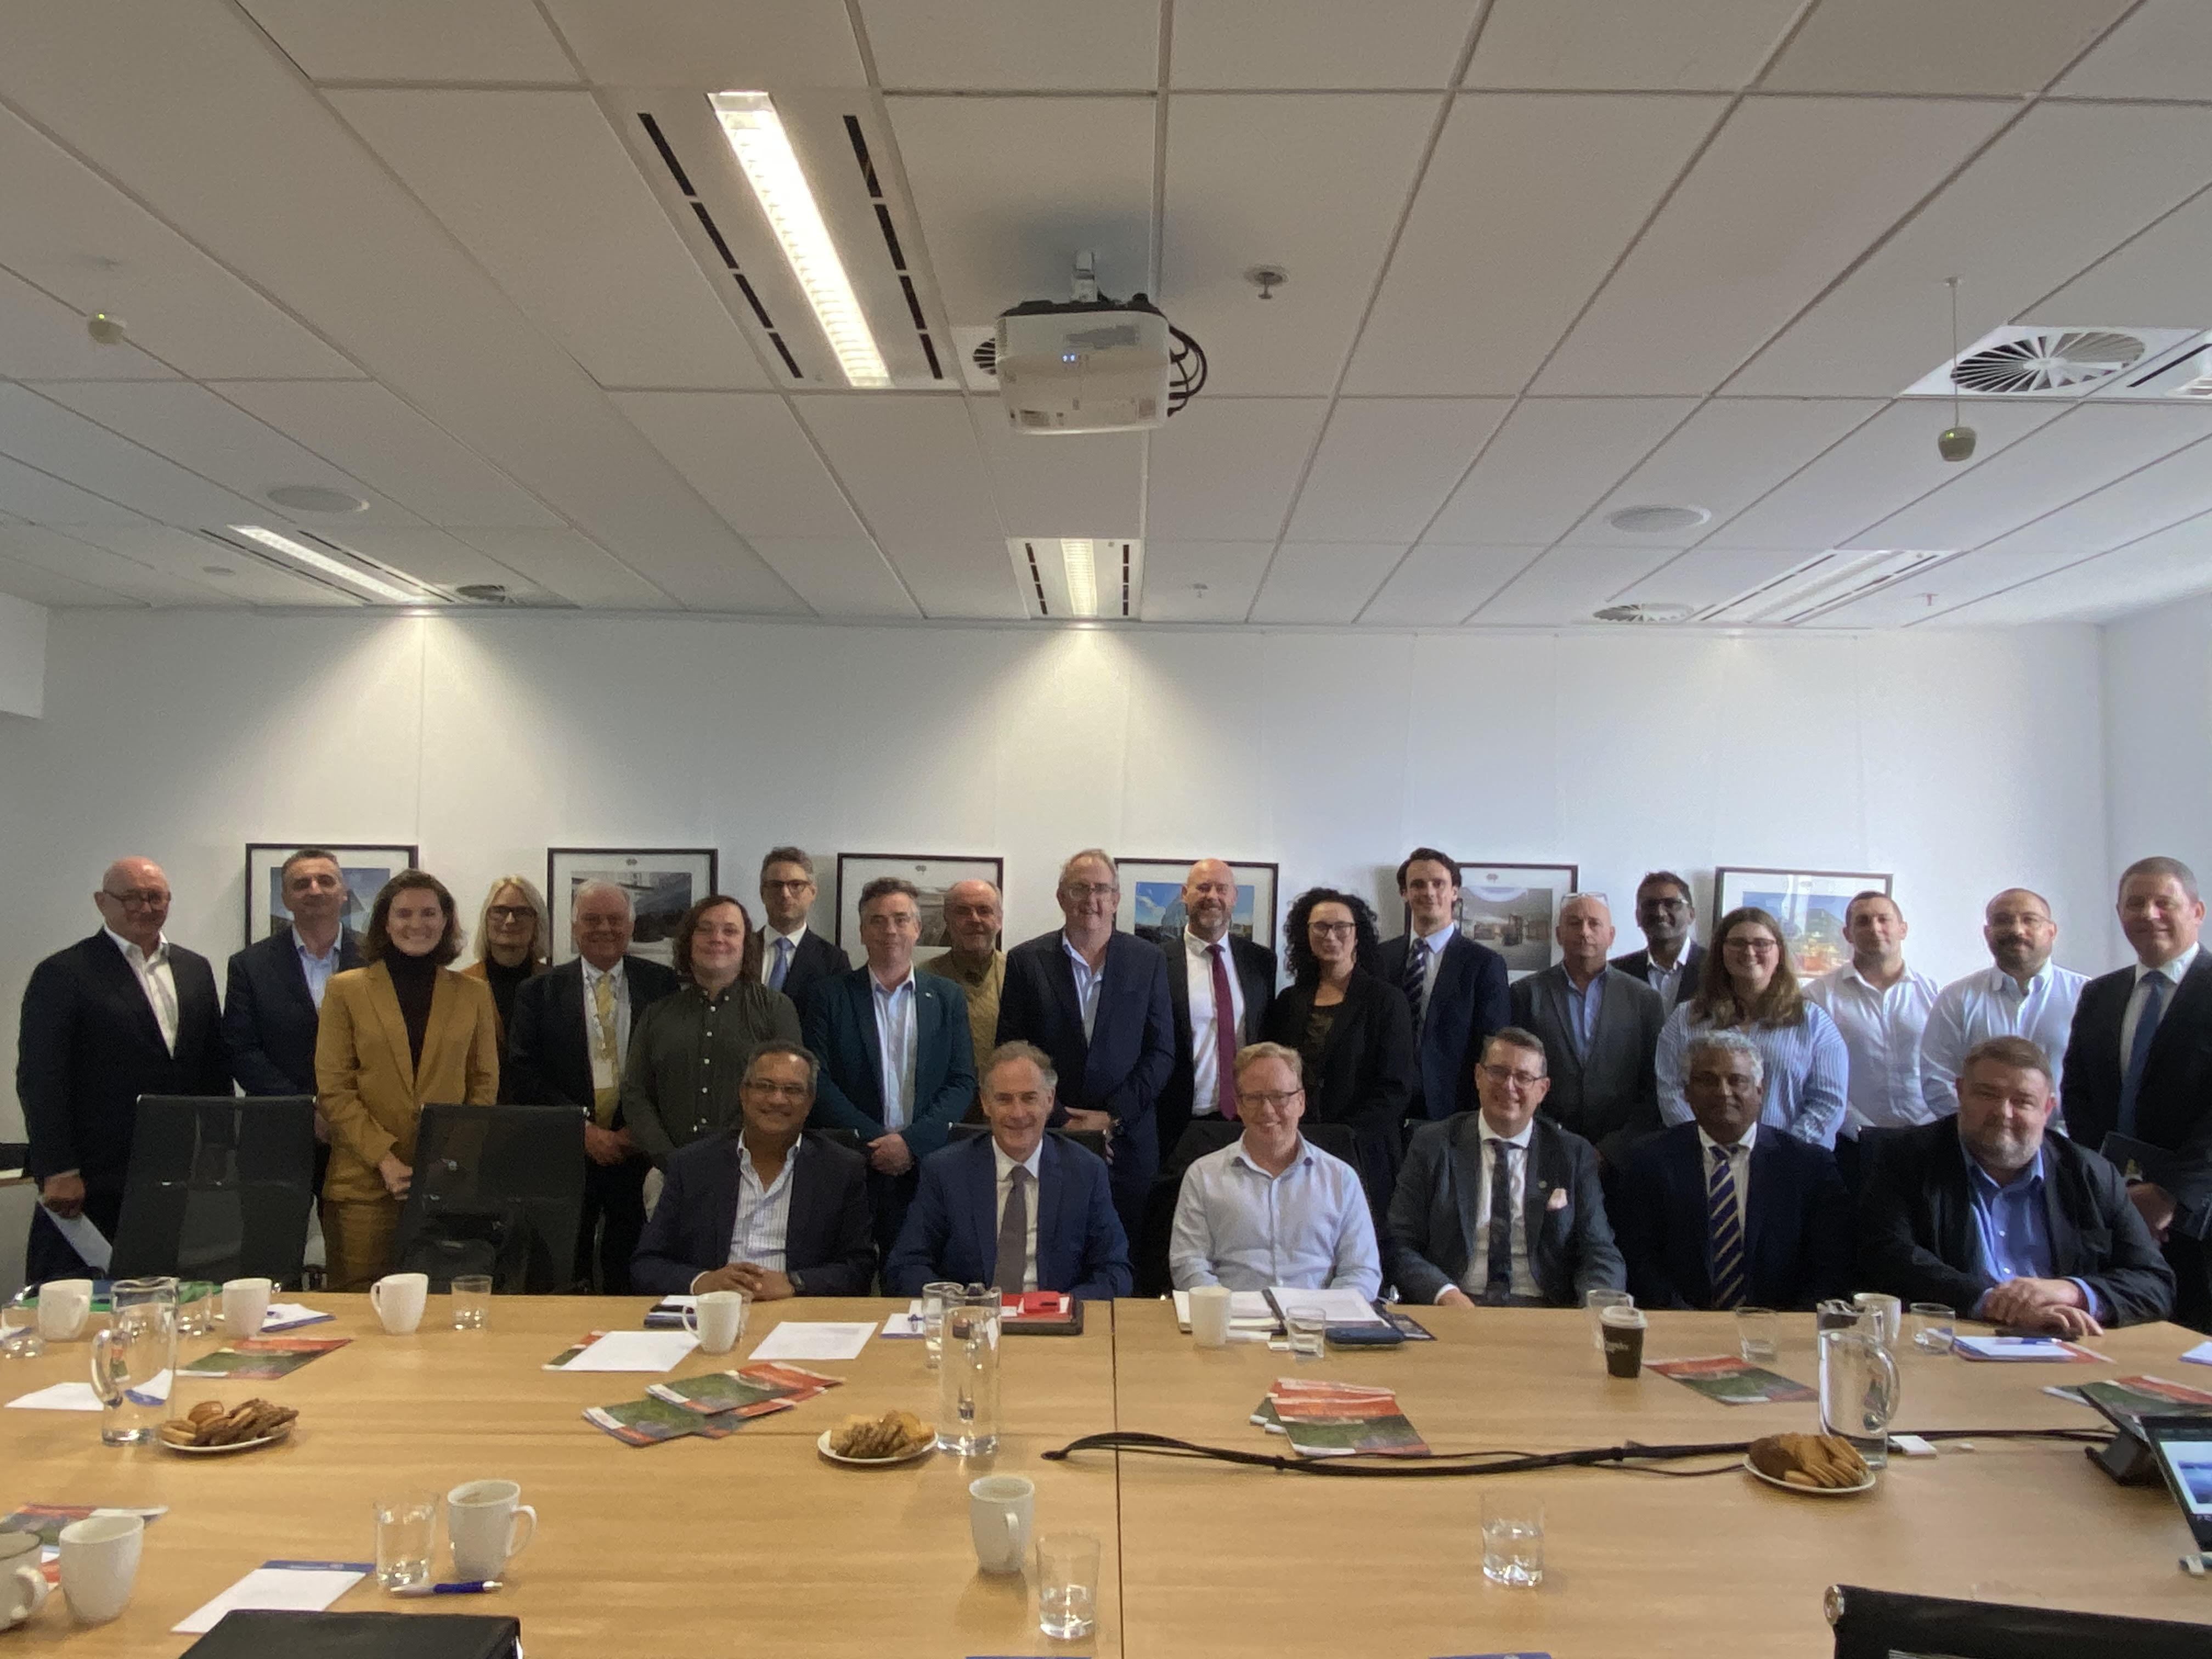 Global Victoria champions Pacific trade expansion at Melbourne roundtable